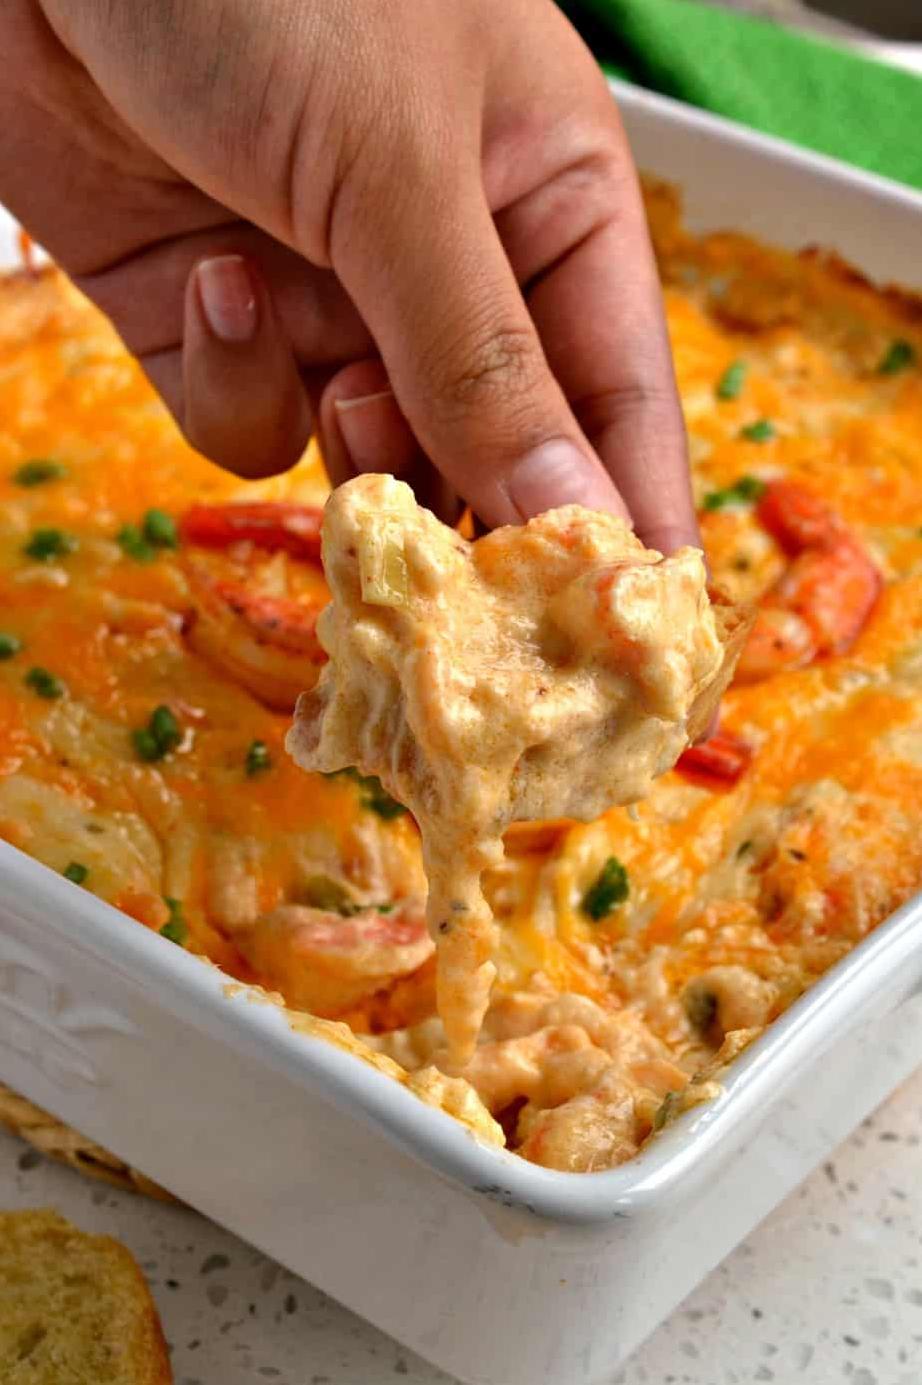  Perfect for any party, this Shrimp Dip will have your guests coming back for more.